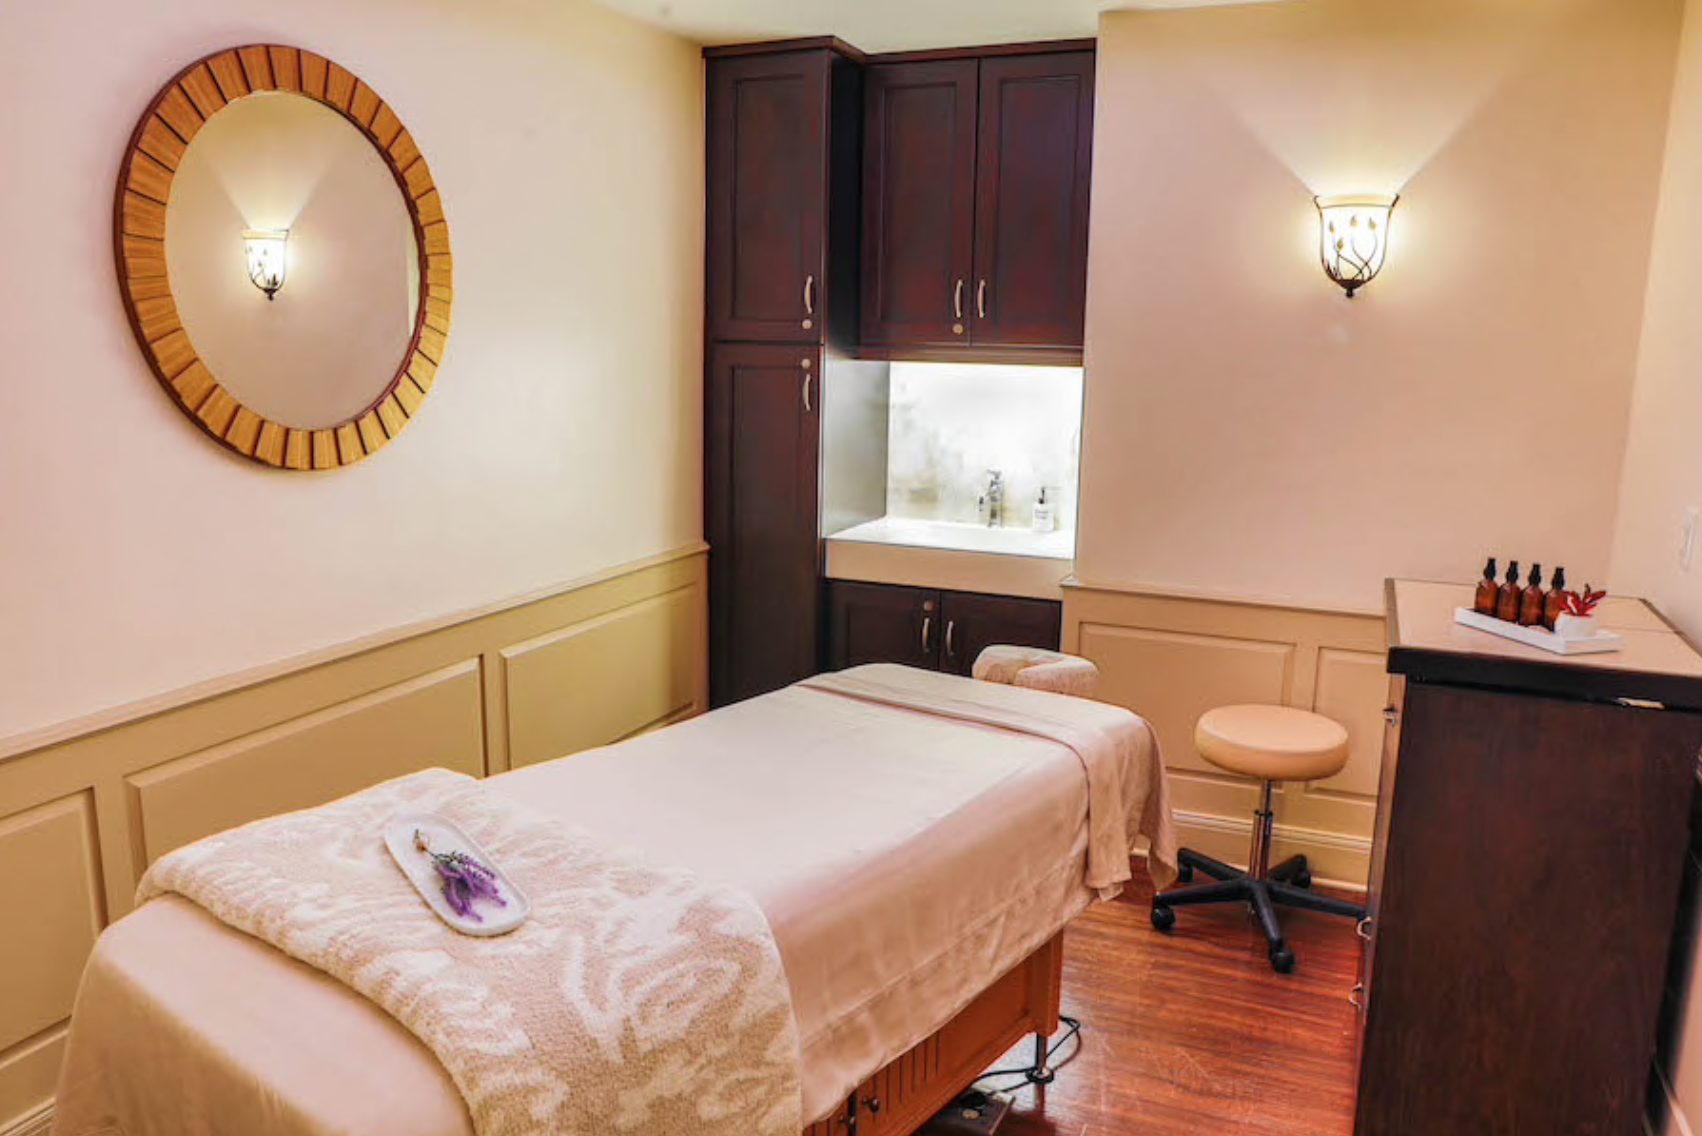 Grand Floridian Spa Opening January 26th